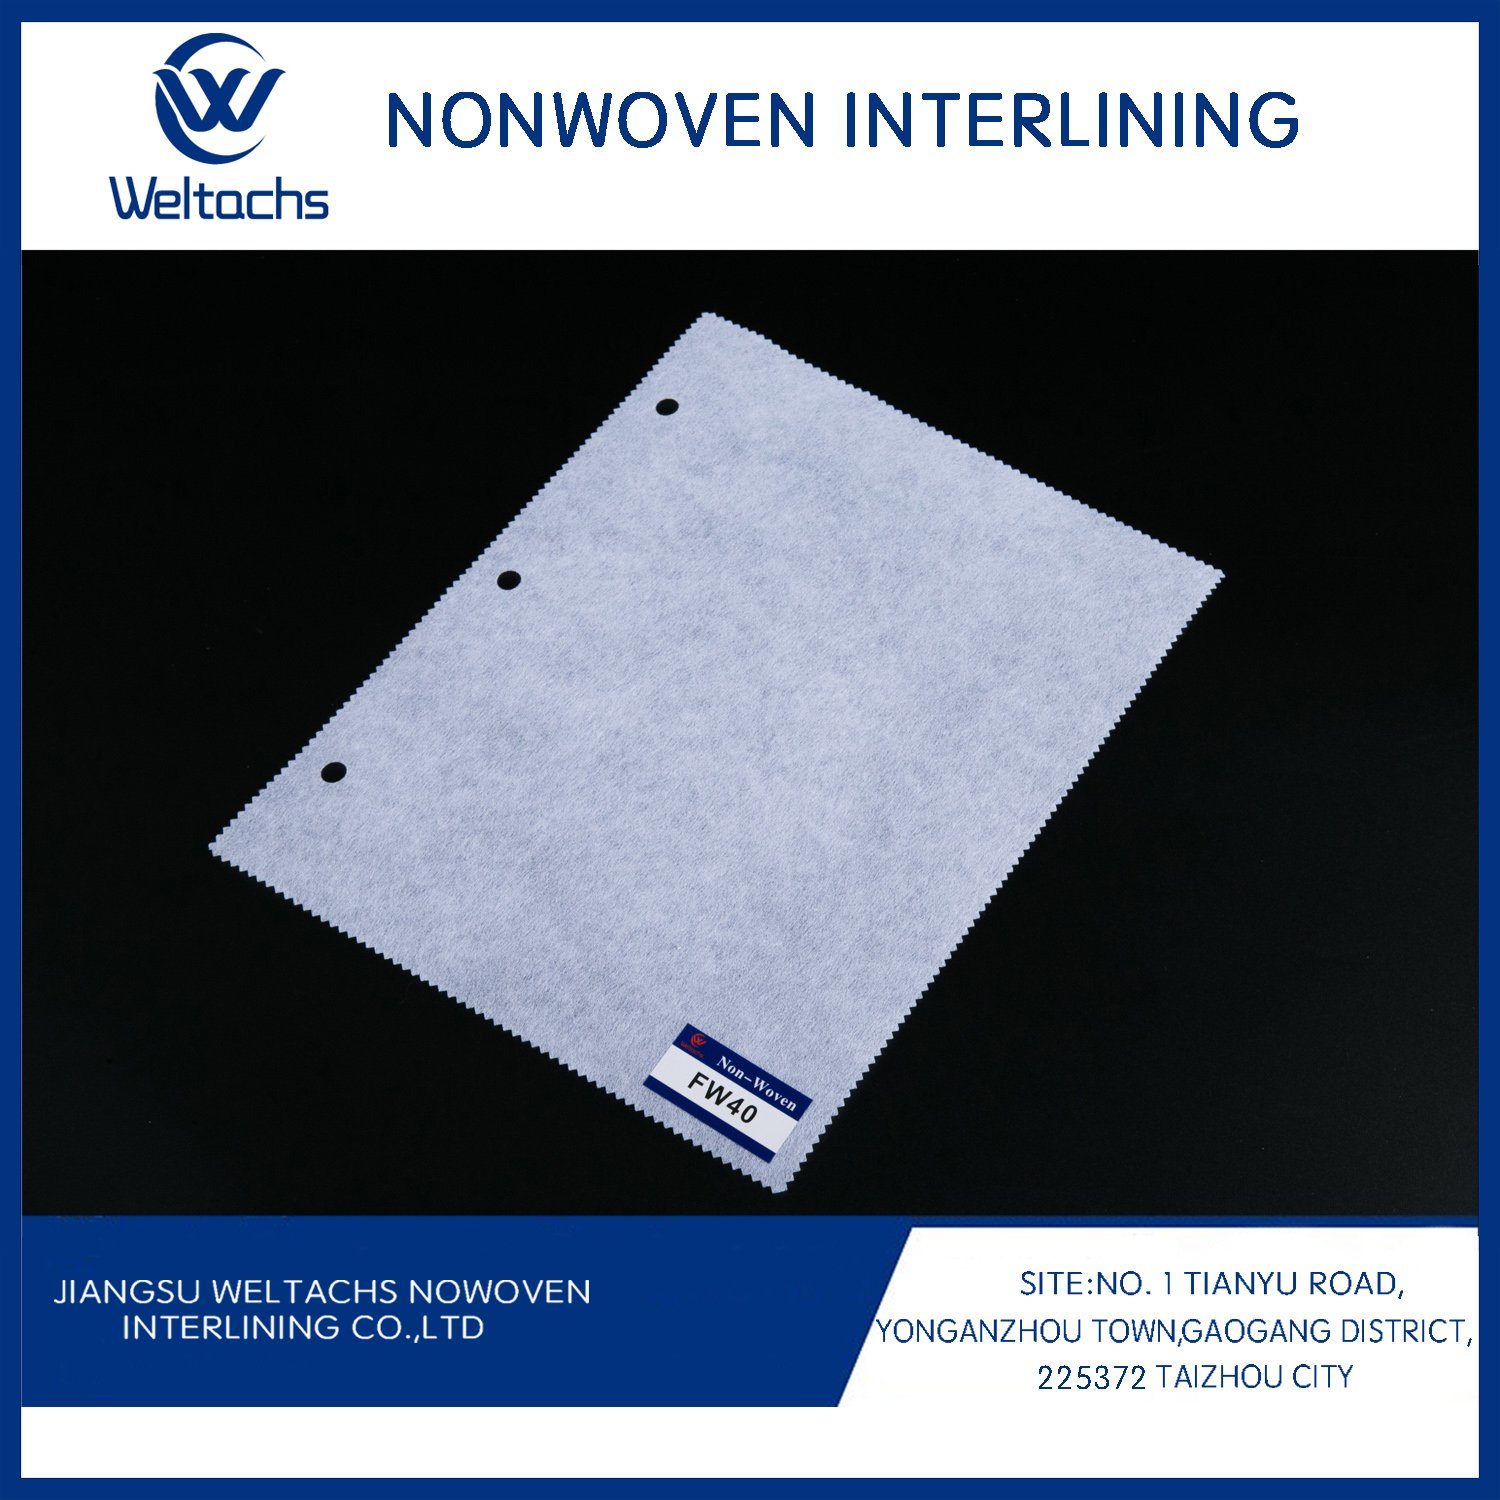 Gum Stay Non Woven Chemical Bonded Base Fabric and Scatter Fused Embroidery Stabilizer Fusing Interlining